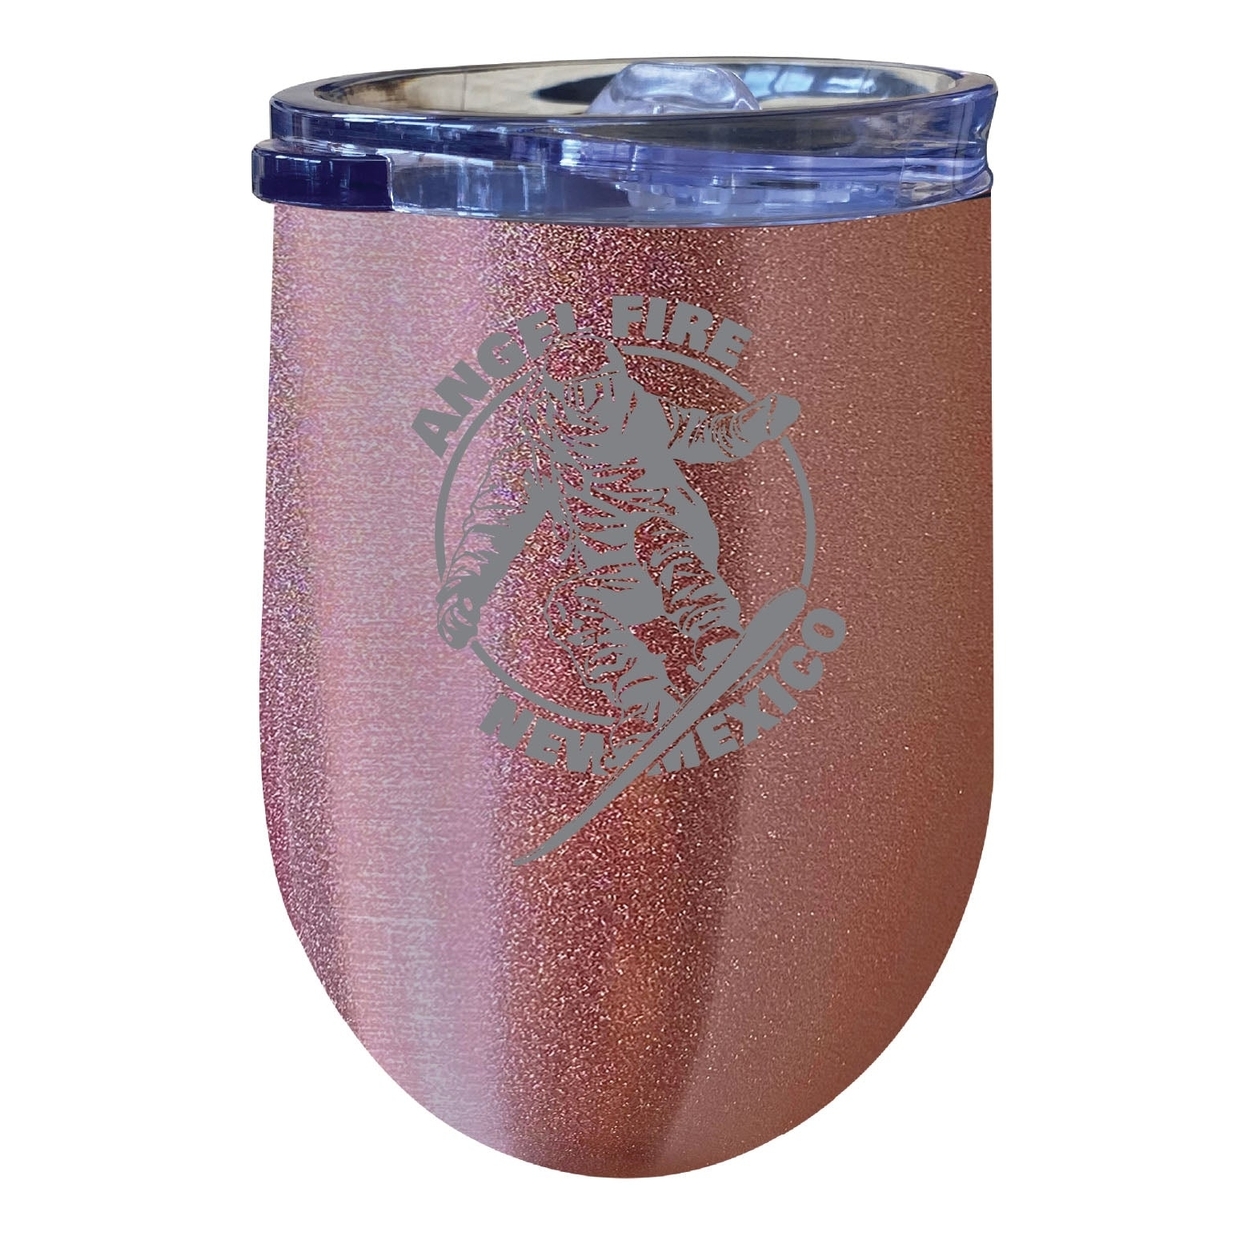 Angel Fire New Mexico Souvenir 12 Oz Engraved Insulated Wine Stainless Steel Tumbler - Rose Gold,,Single Unit